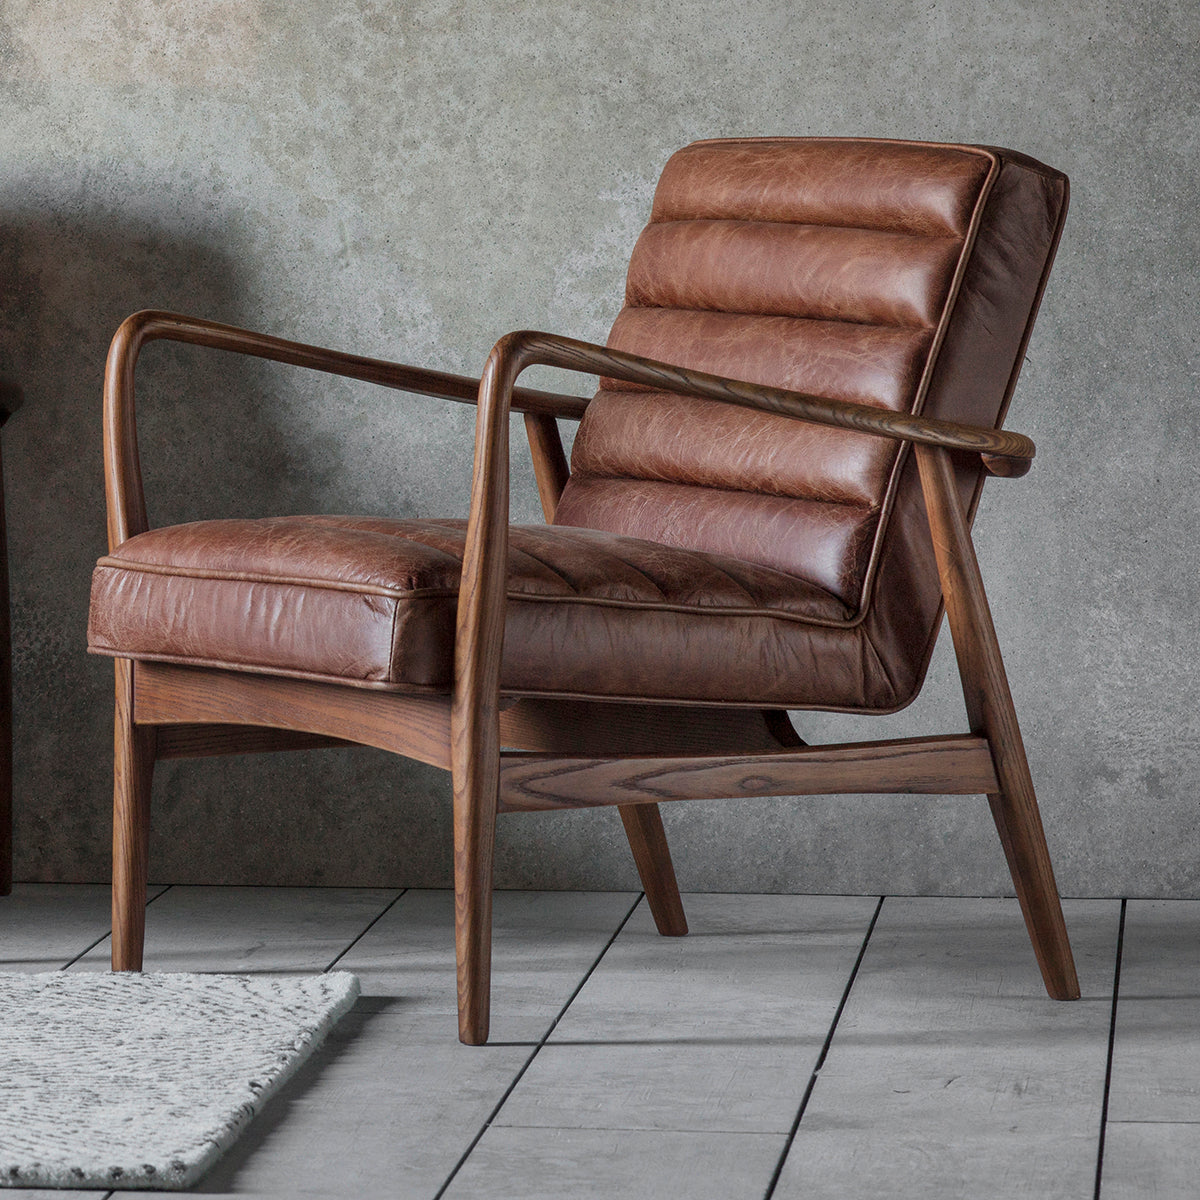 A Vintage Brown Leather lounge chair in front of a grey wall, made by Kikiathome.co.uk for home furniture and interior decor.